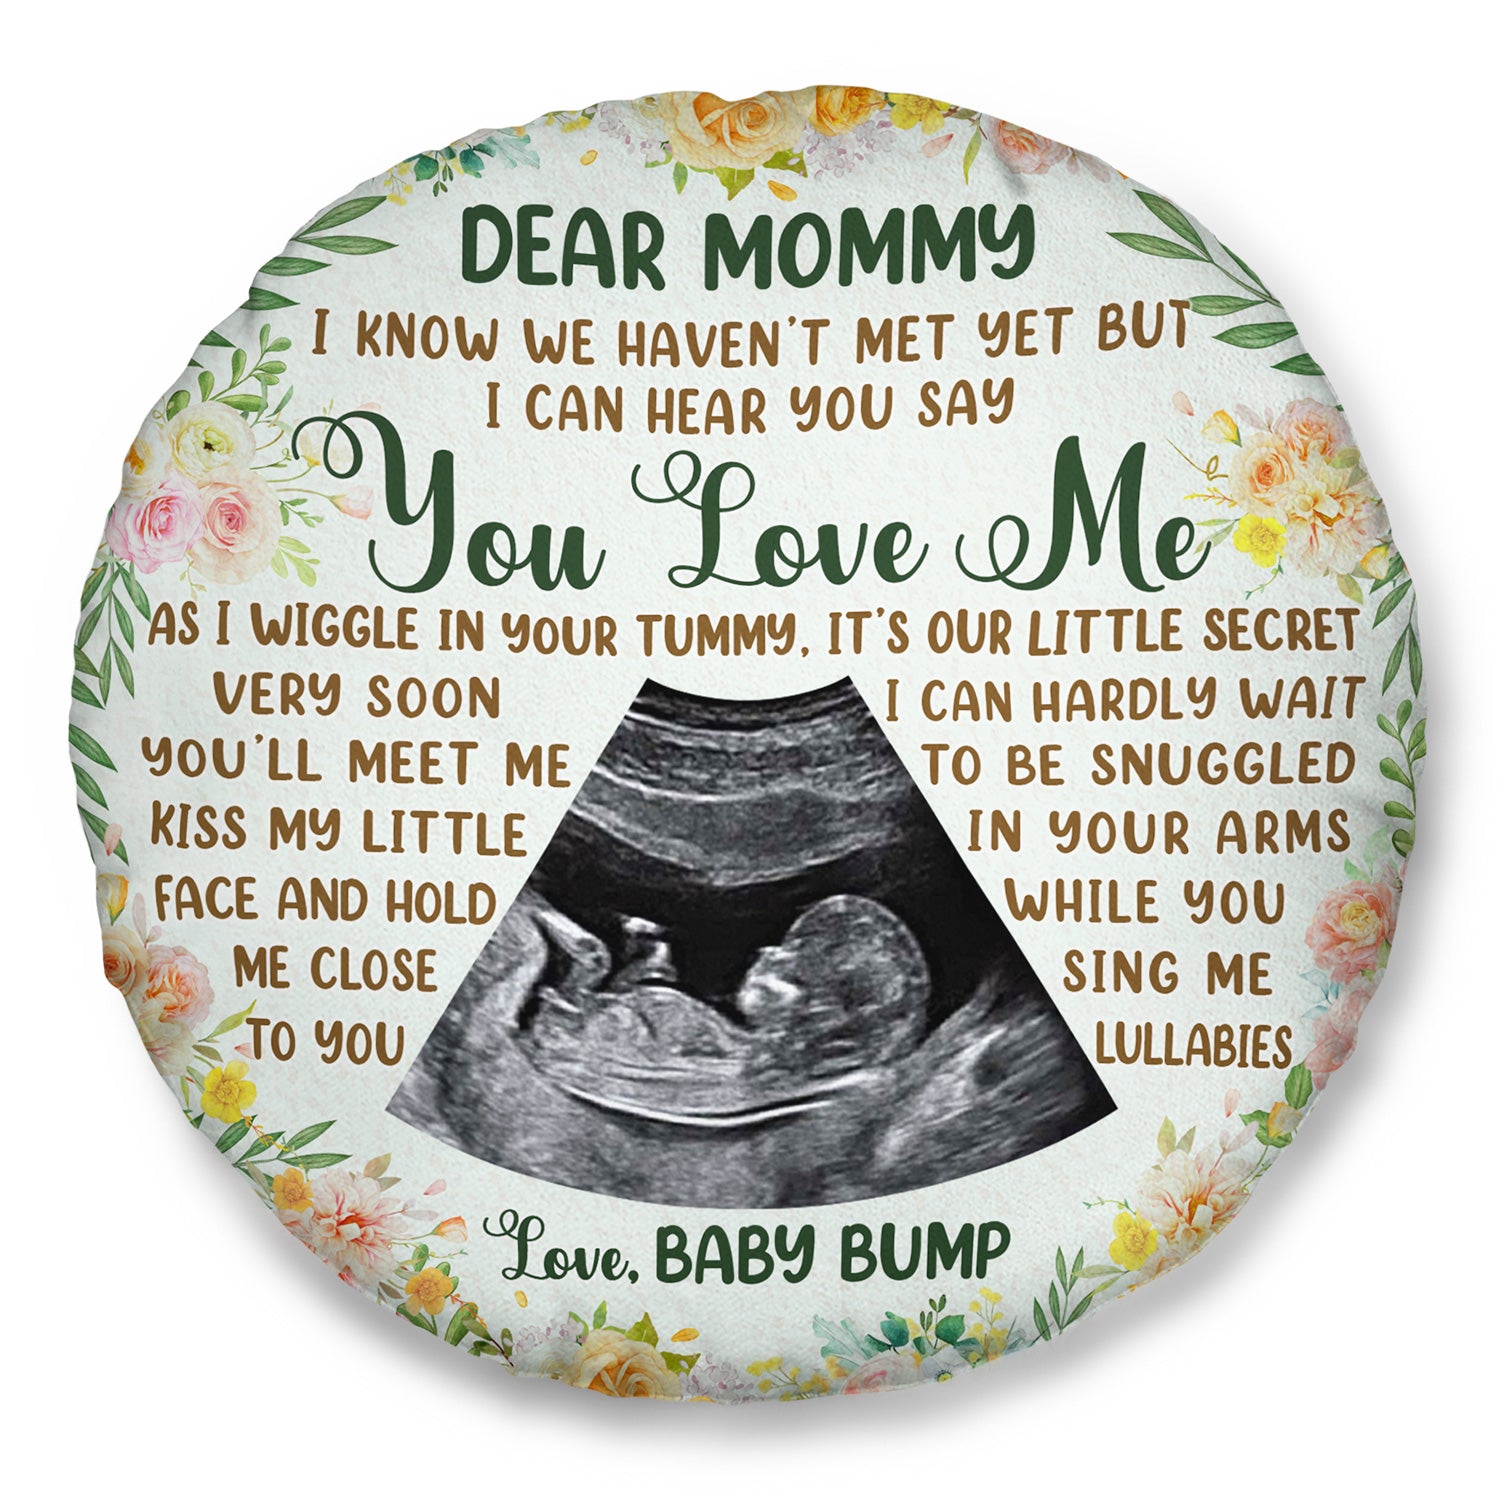 Custom Photo I Can Hear You Say You Love Me - Baby Shower Gift, First Mom, Wife - Personalized Round Pillow